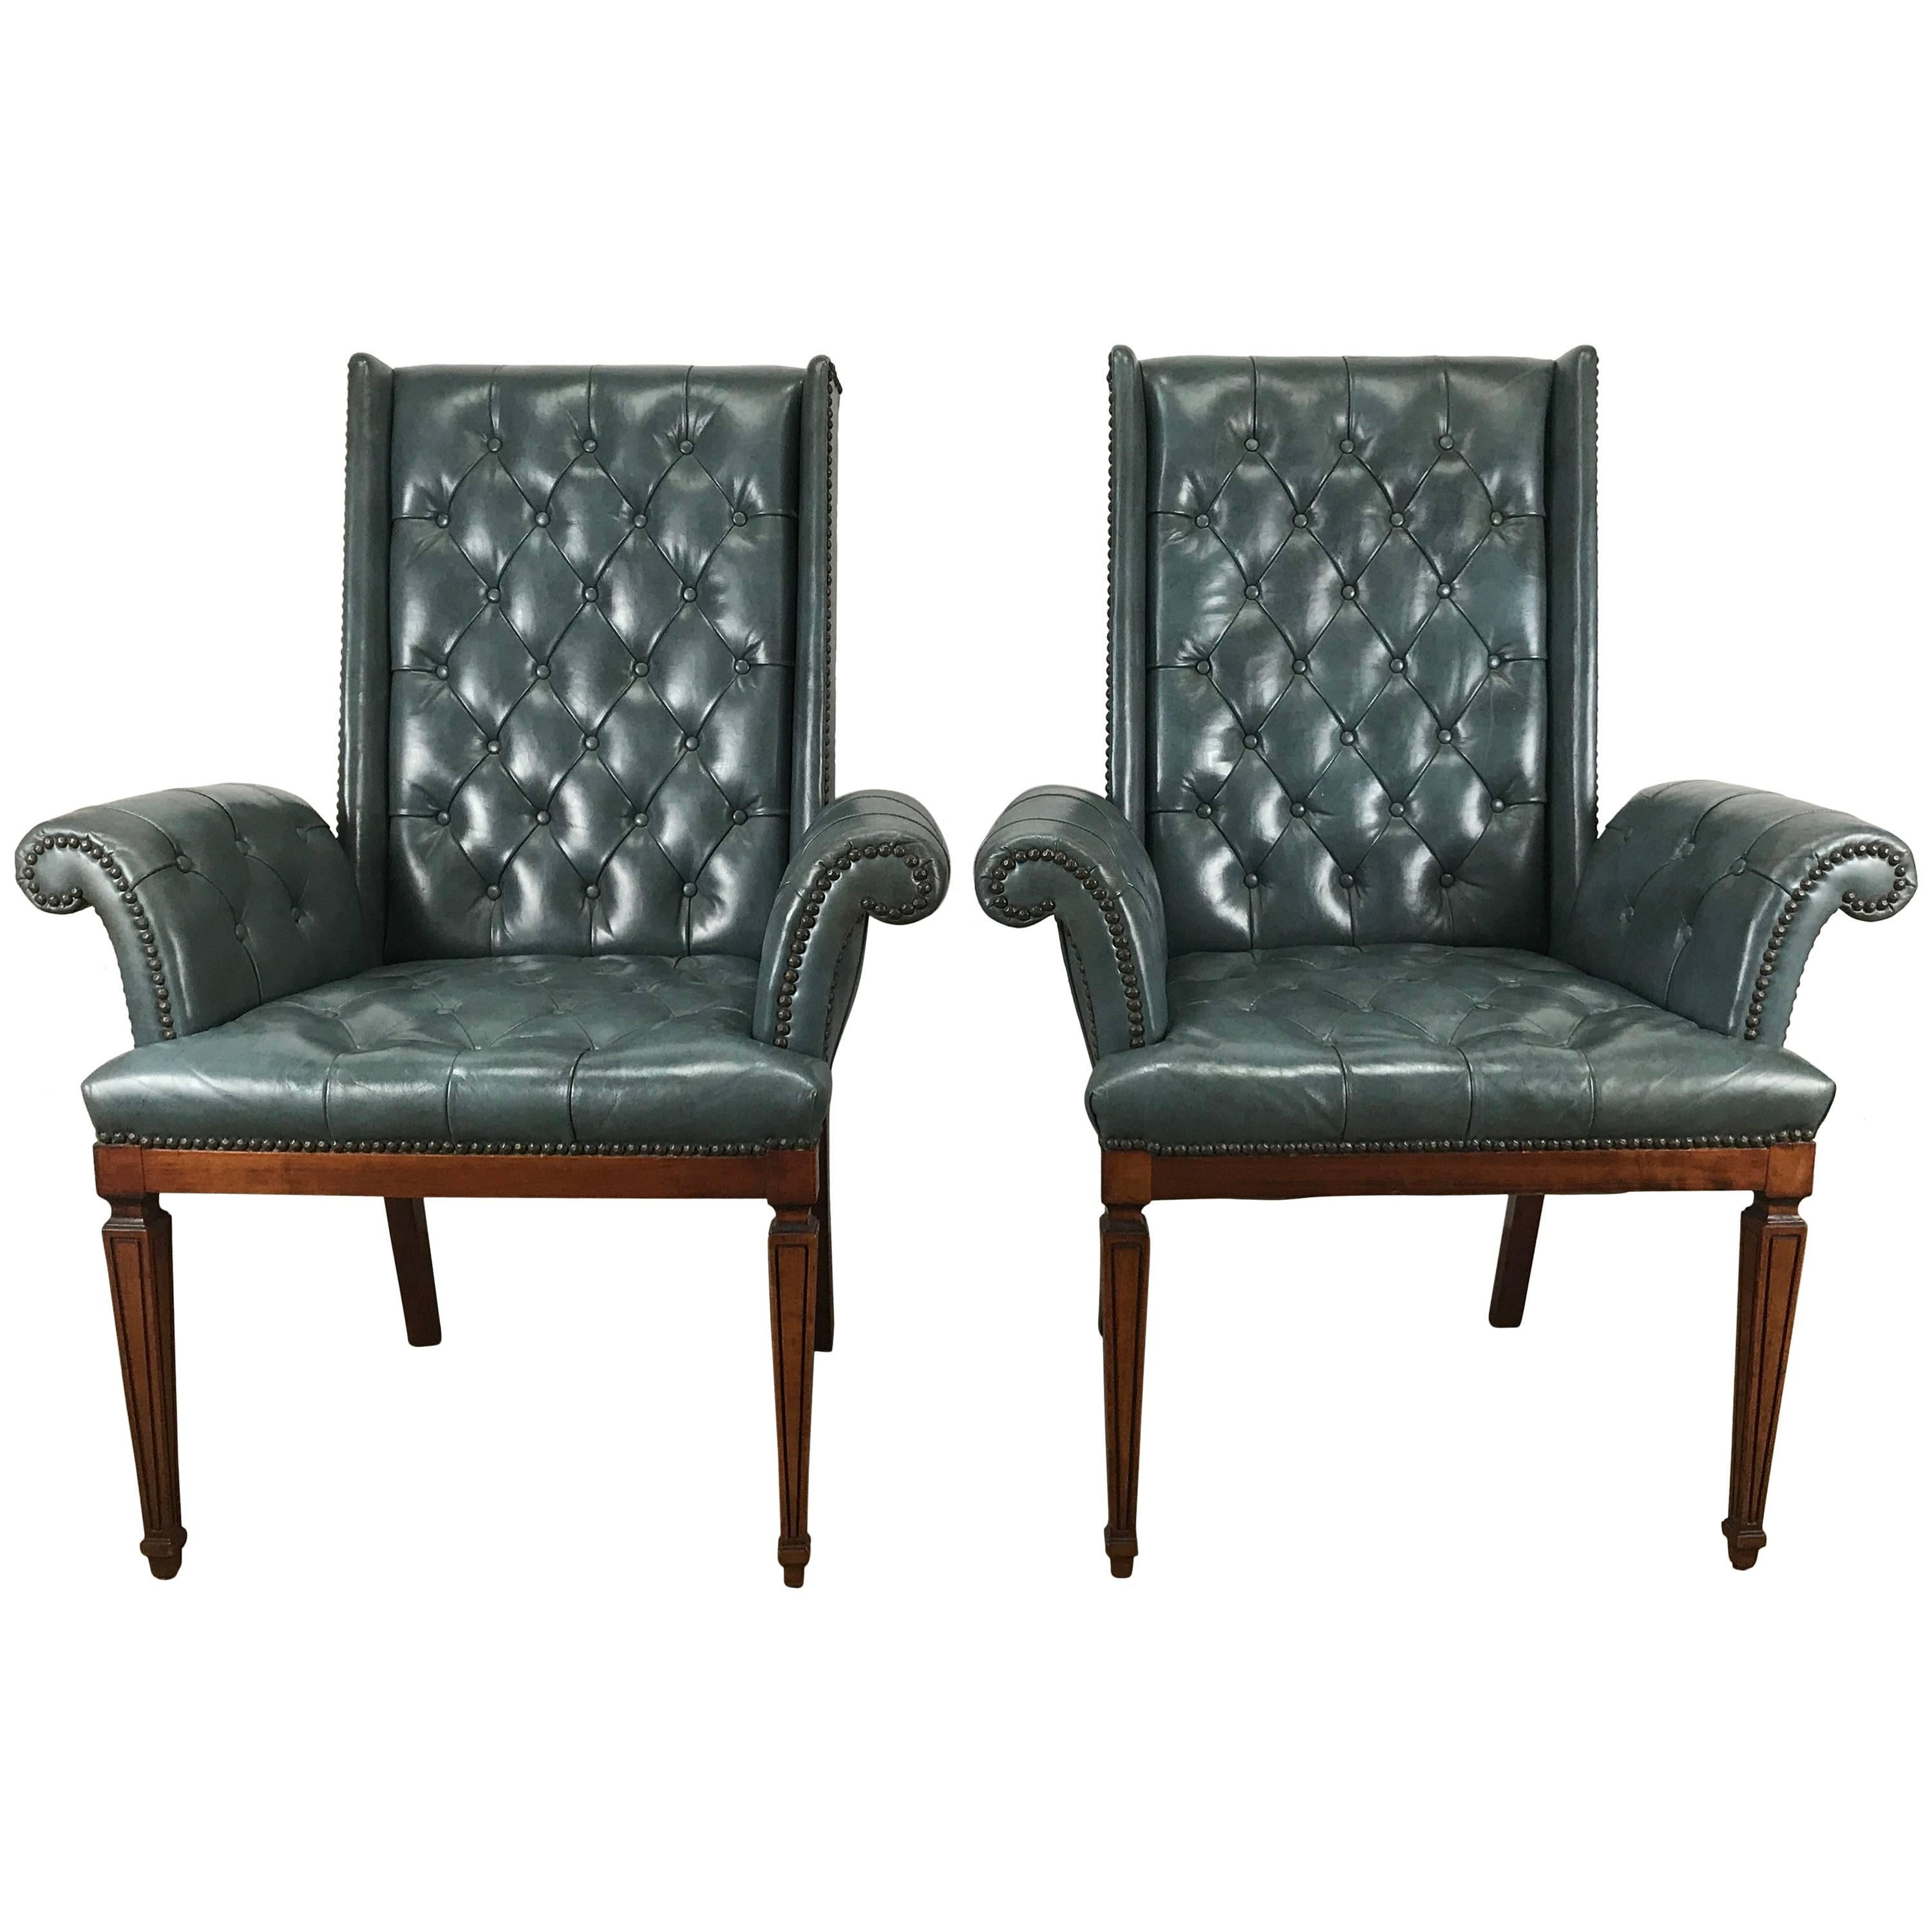 Stunning Blue Leather Button Tufted Regency Armchairs, Tommi Parzinger